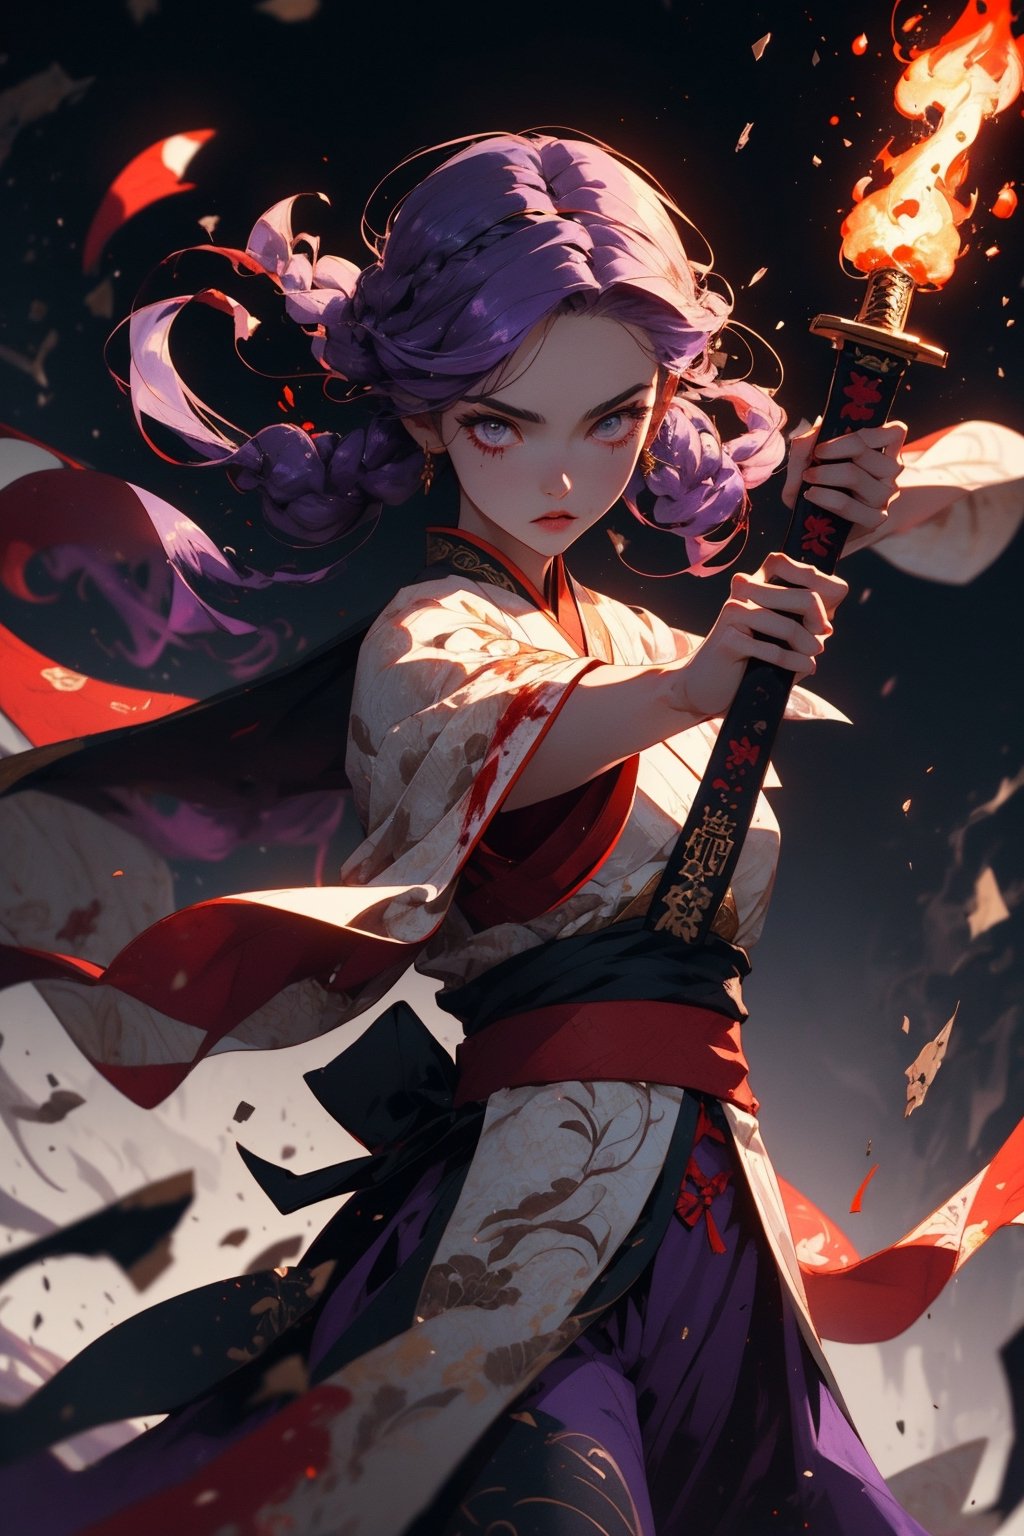 Masterpiece, 1girl, wear purple hanfu, Chinese Traditional cloth, long purple hair, hair braid, holding a blood sword, dark purple background, fire effect, ink painting style, dynamic pose, battle pose
